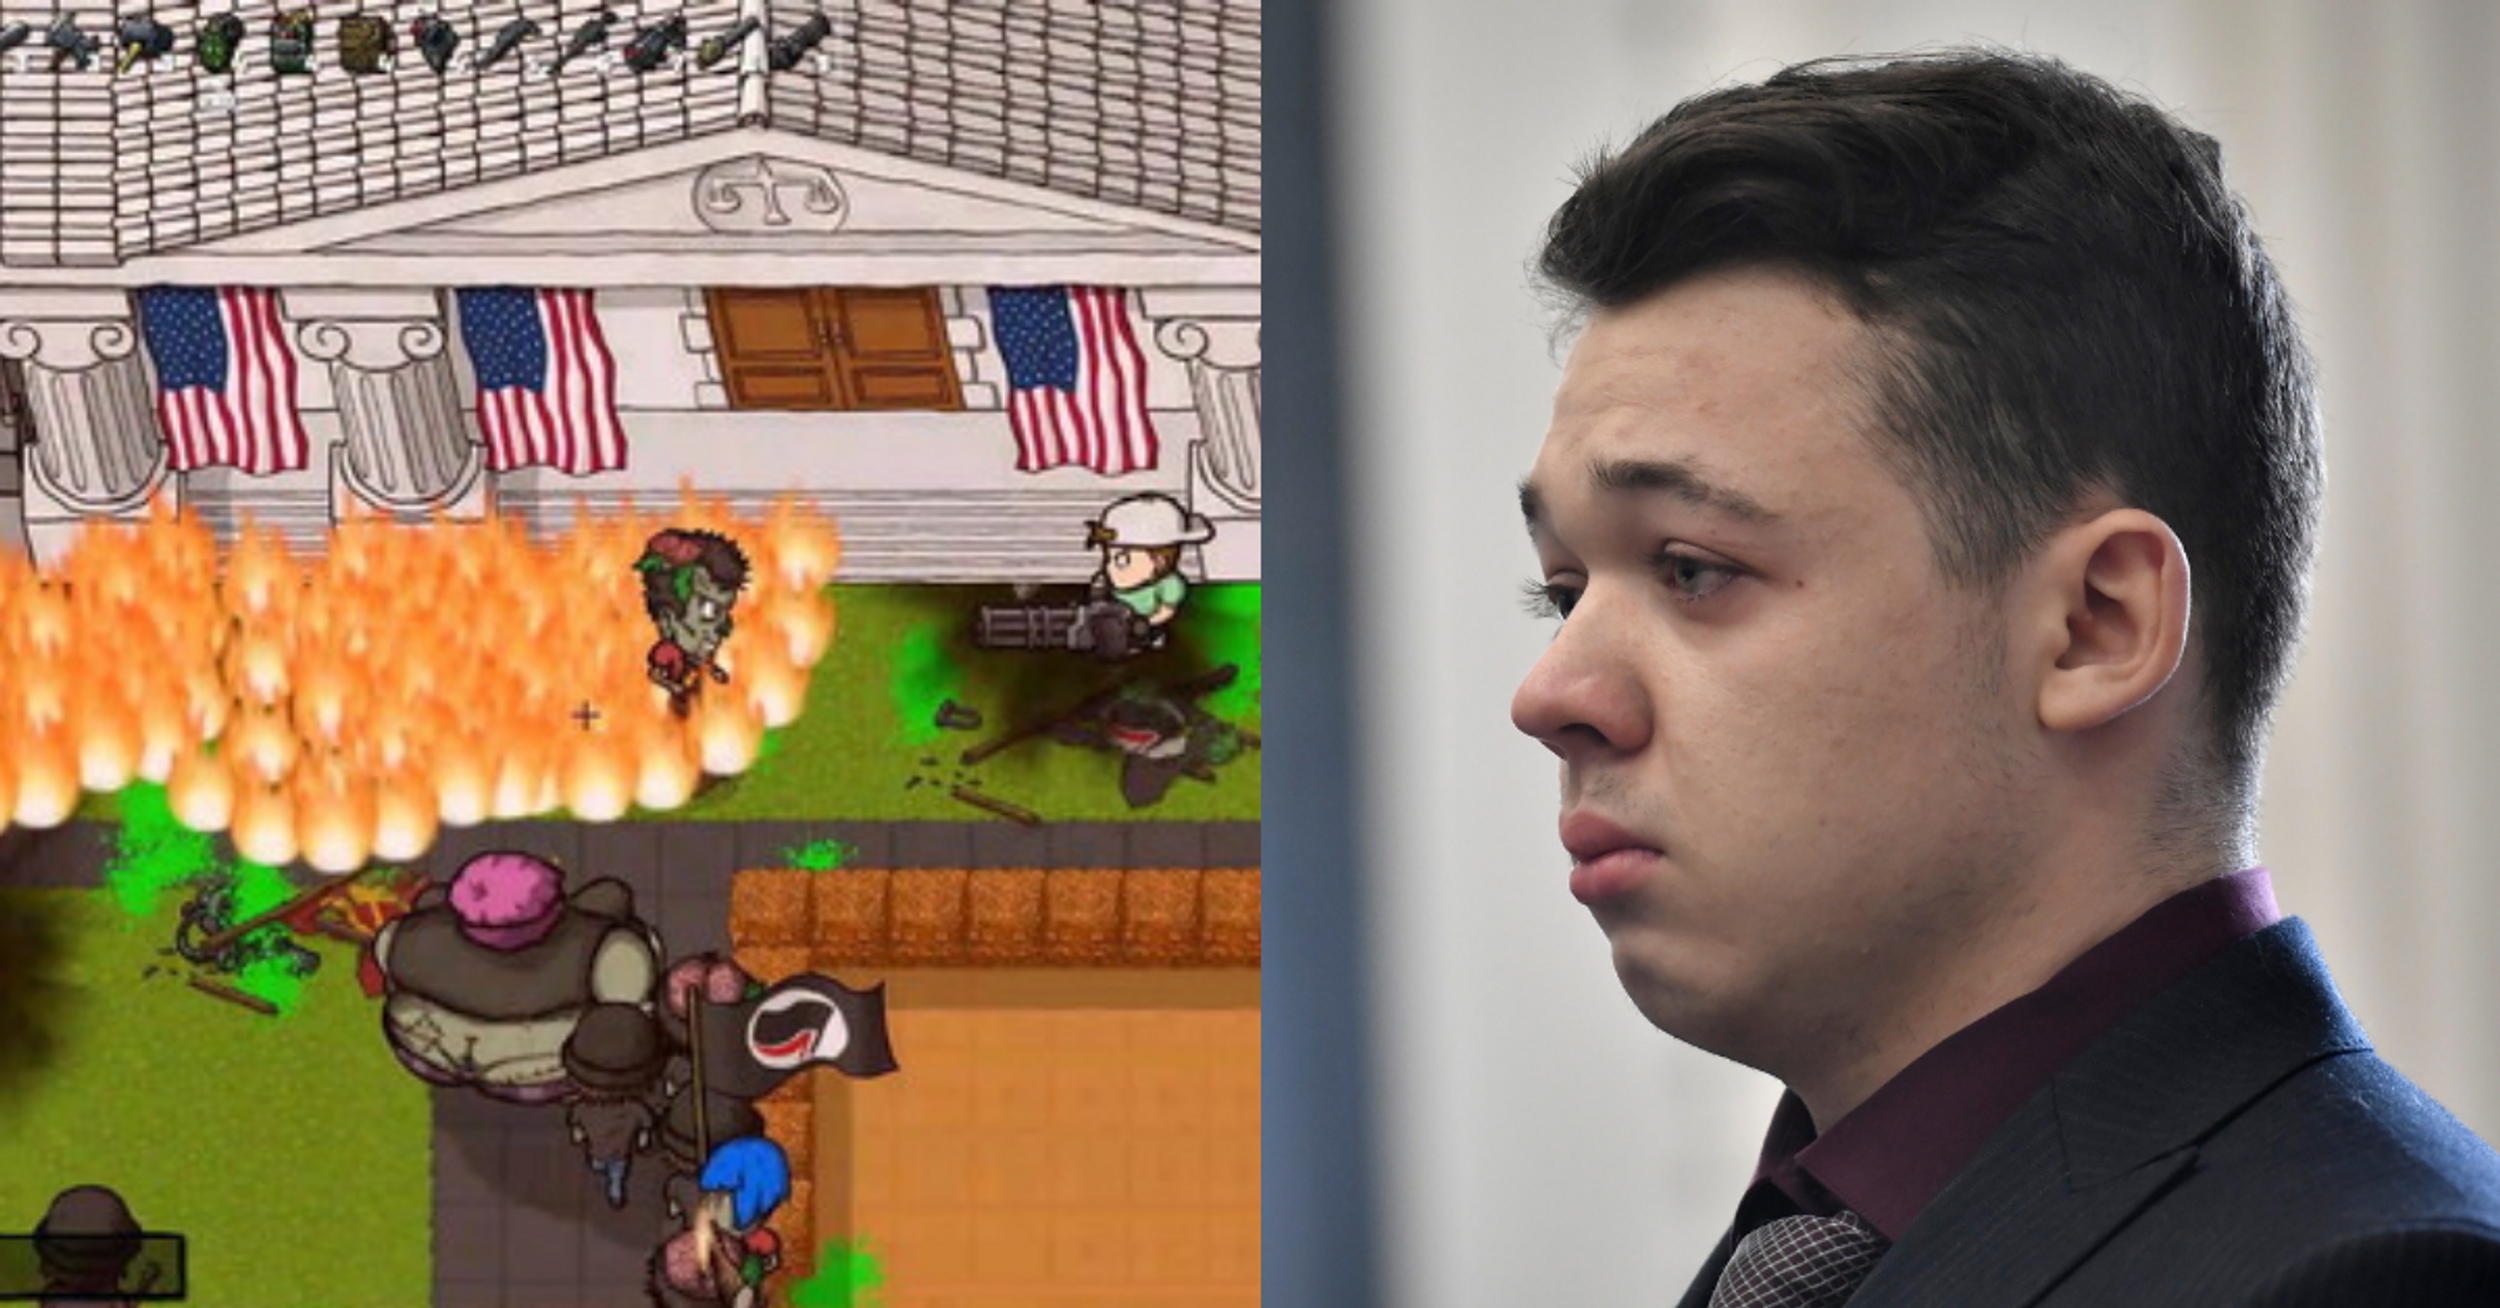 Far-Right Video Game Where You Play As Kyle Rittenhouse Shooting 'Zombie' Protesters Sparks Outrage